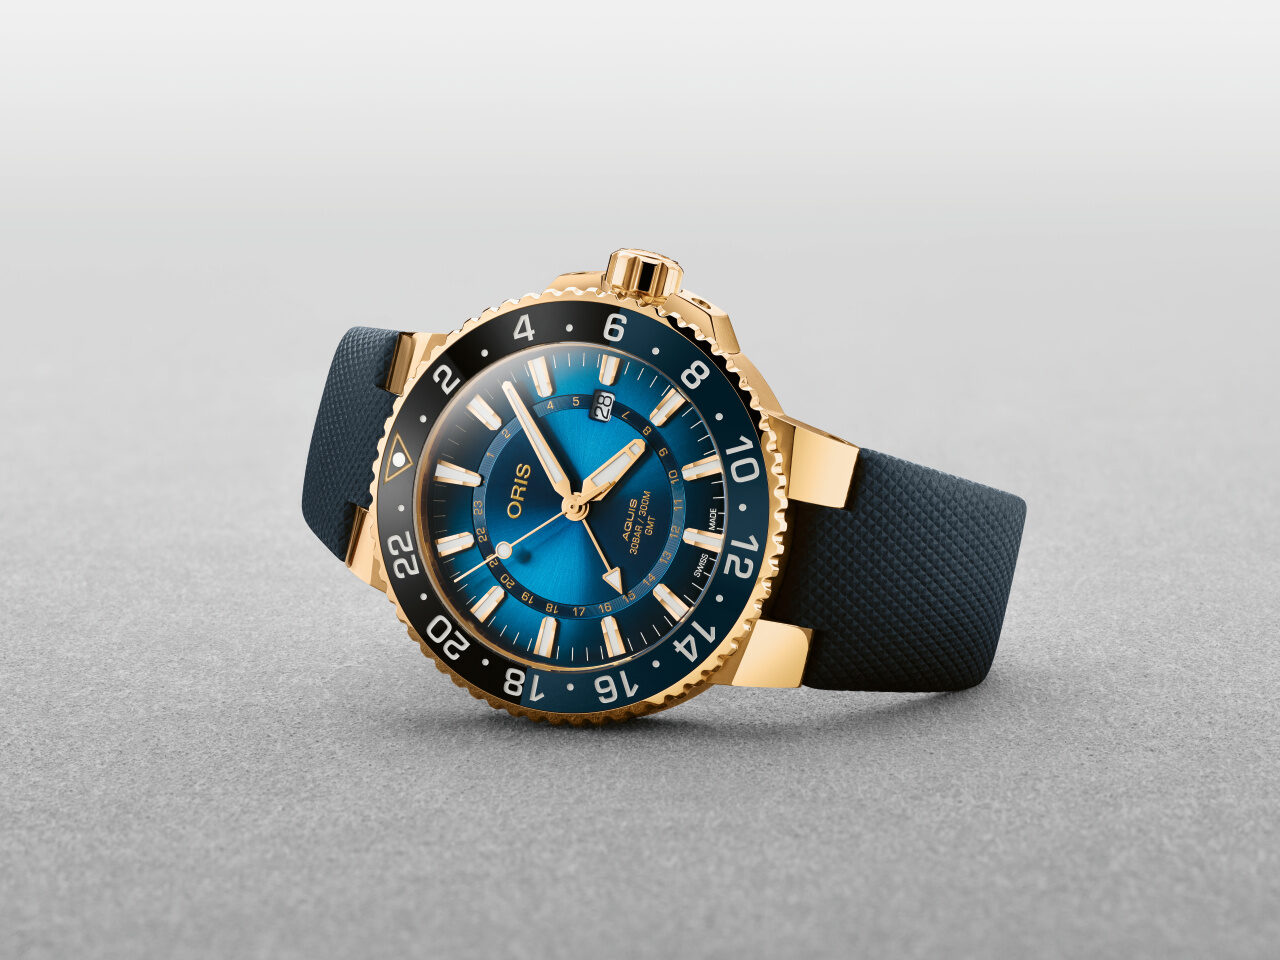 01 798 7754 6185 Set Oris Carysfort Reef Limited Edition LowRes 11968